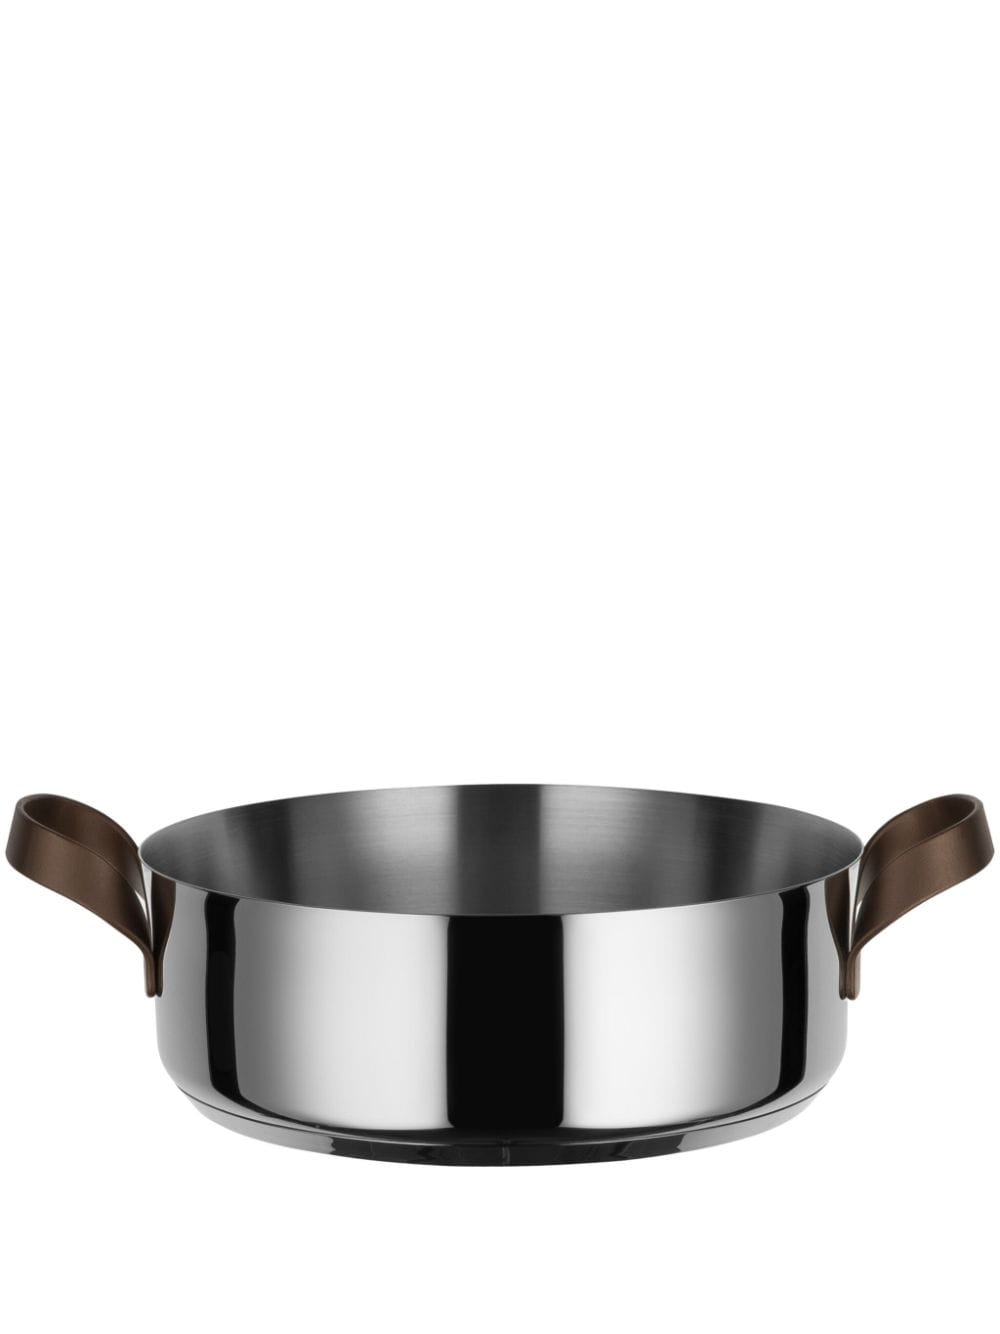 Image 1 of Alessi Edo stainless-steel casserole (5l)